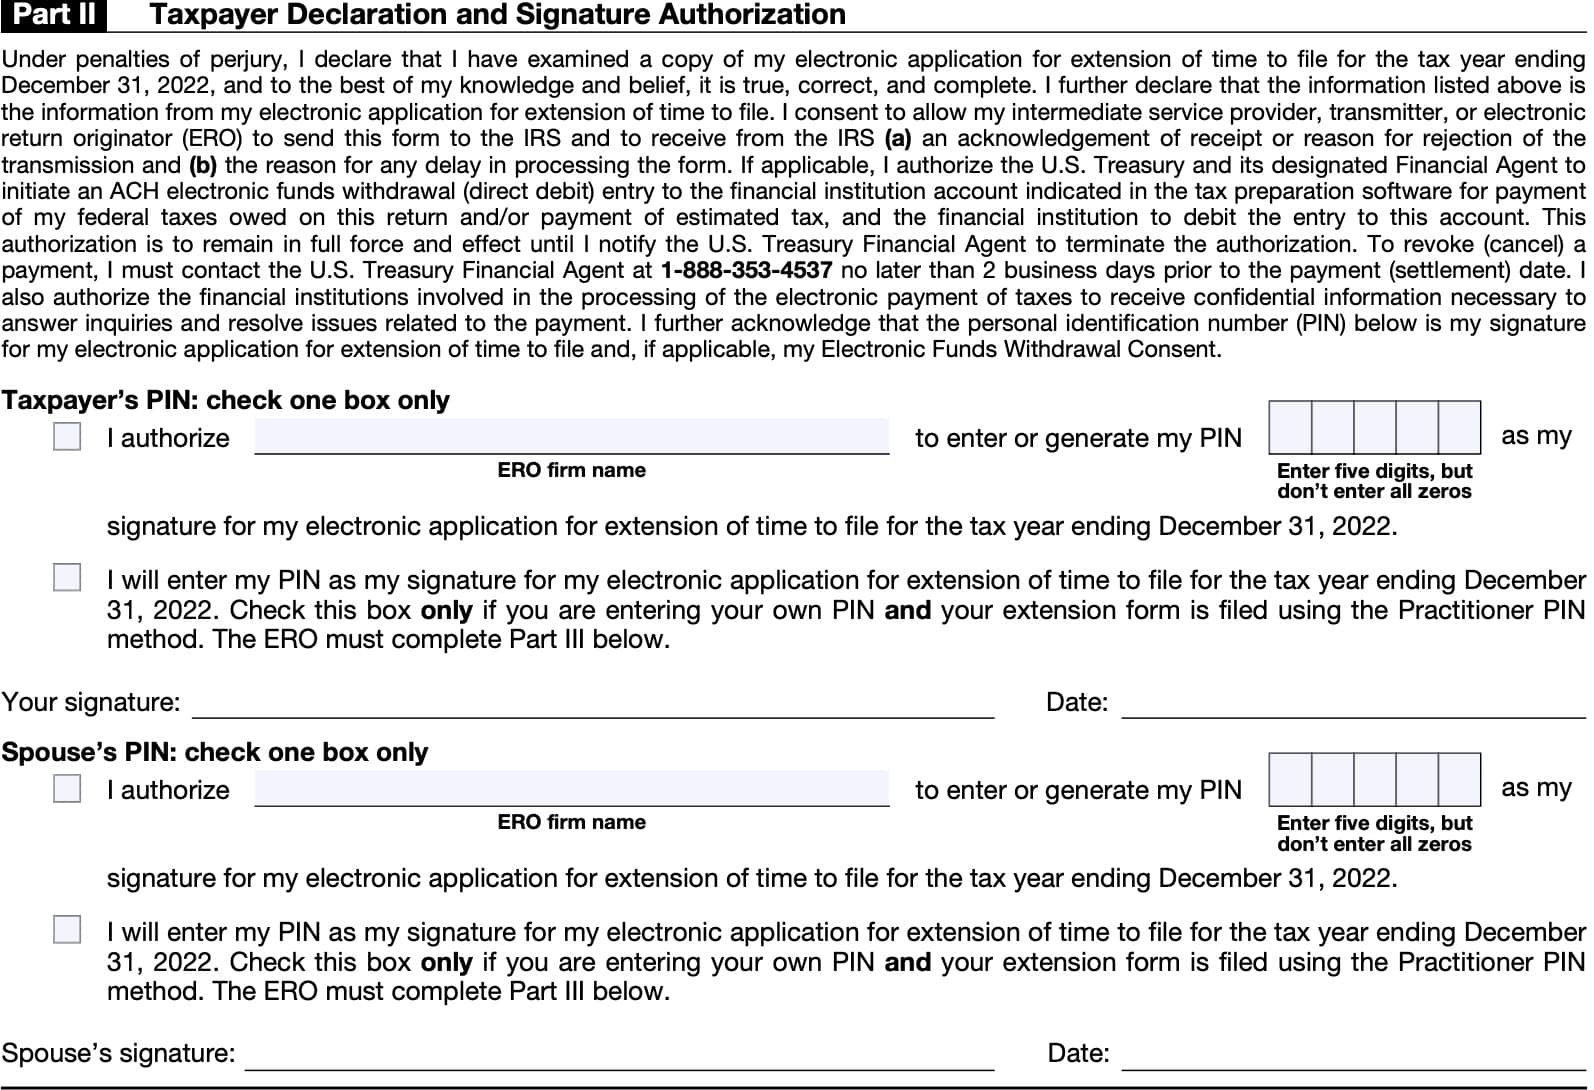 irs form 8878, part ii: taxpayer declaration and signature authorization